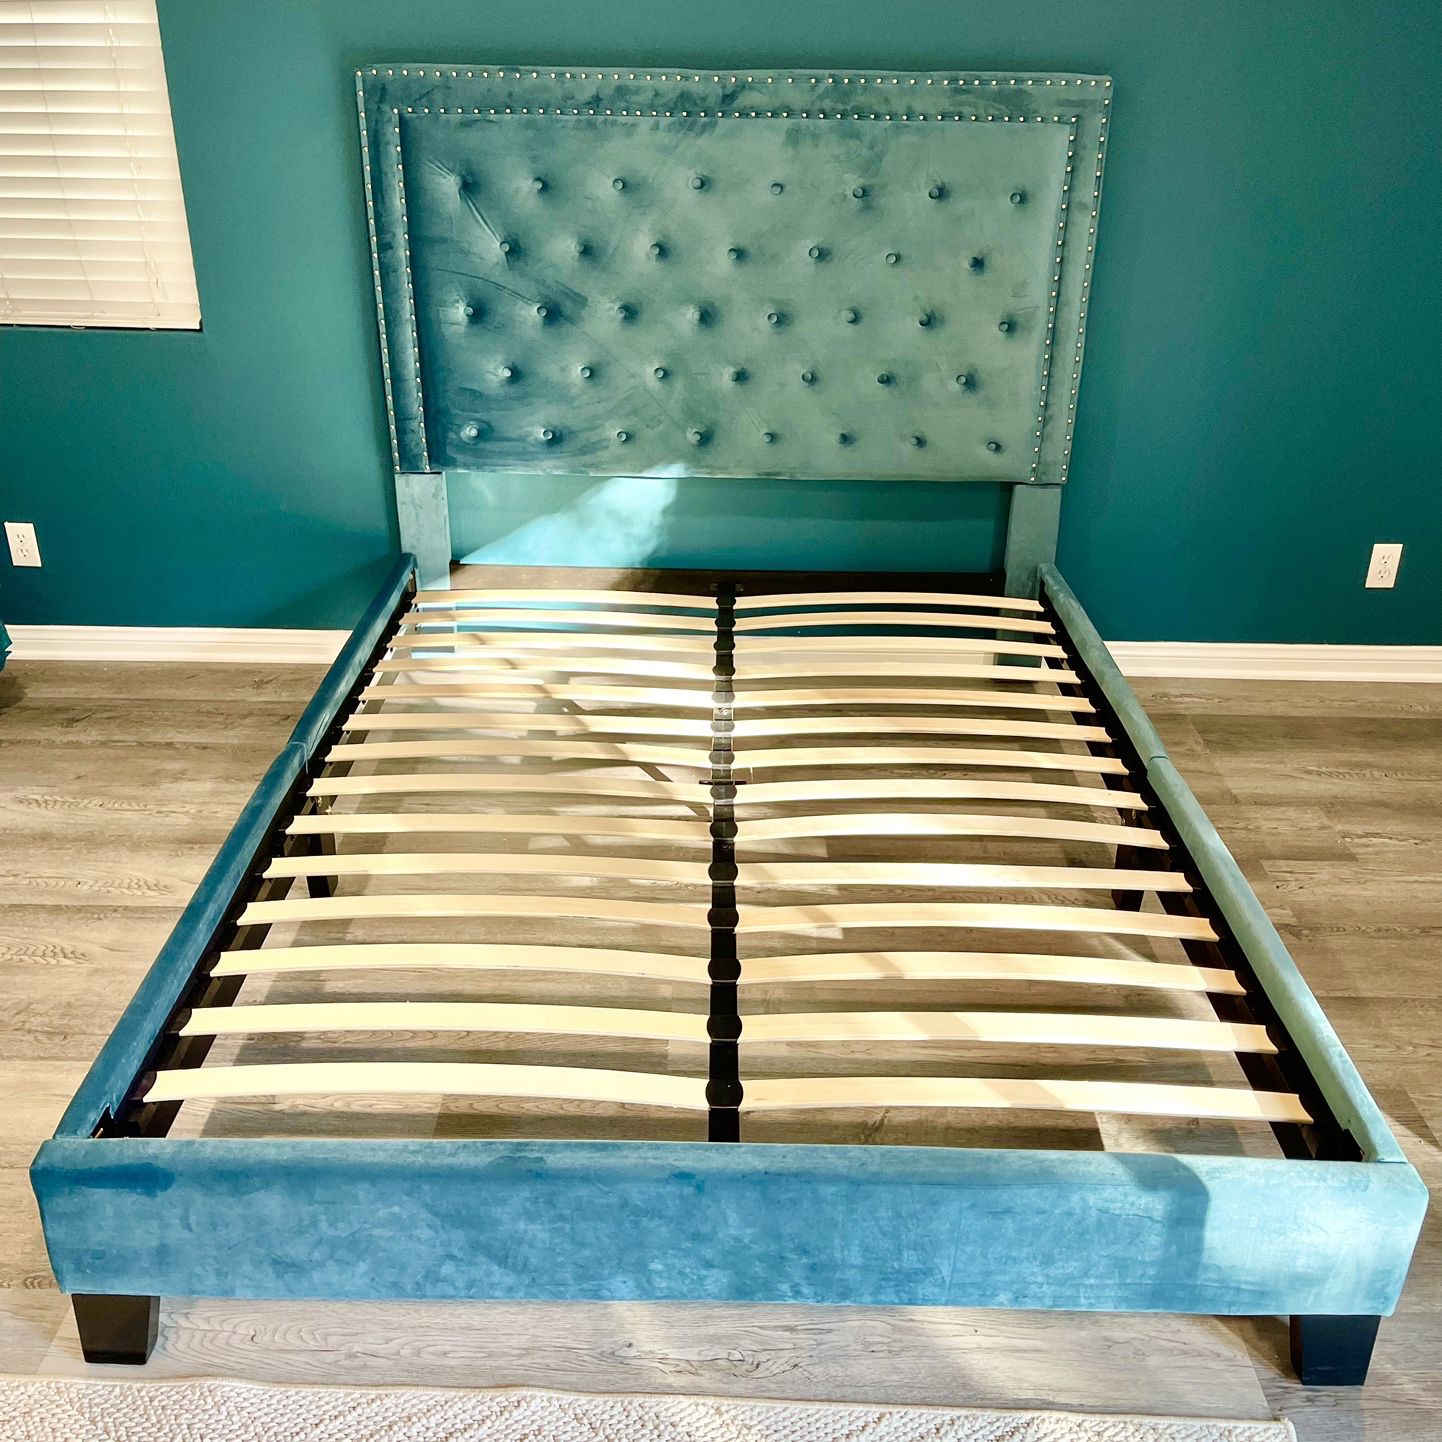 New Queen size blue velvet Tufted Headboard And Bed Frame With Nailheads